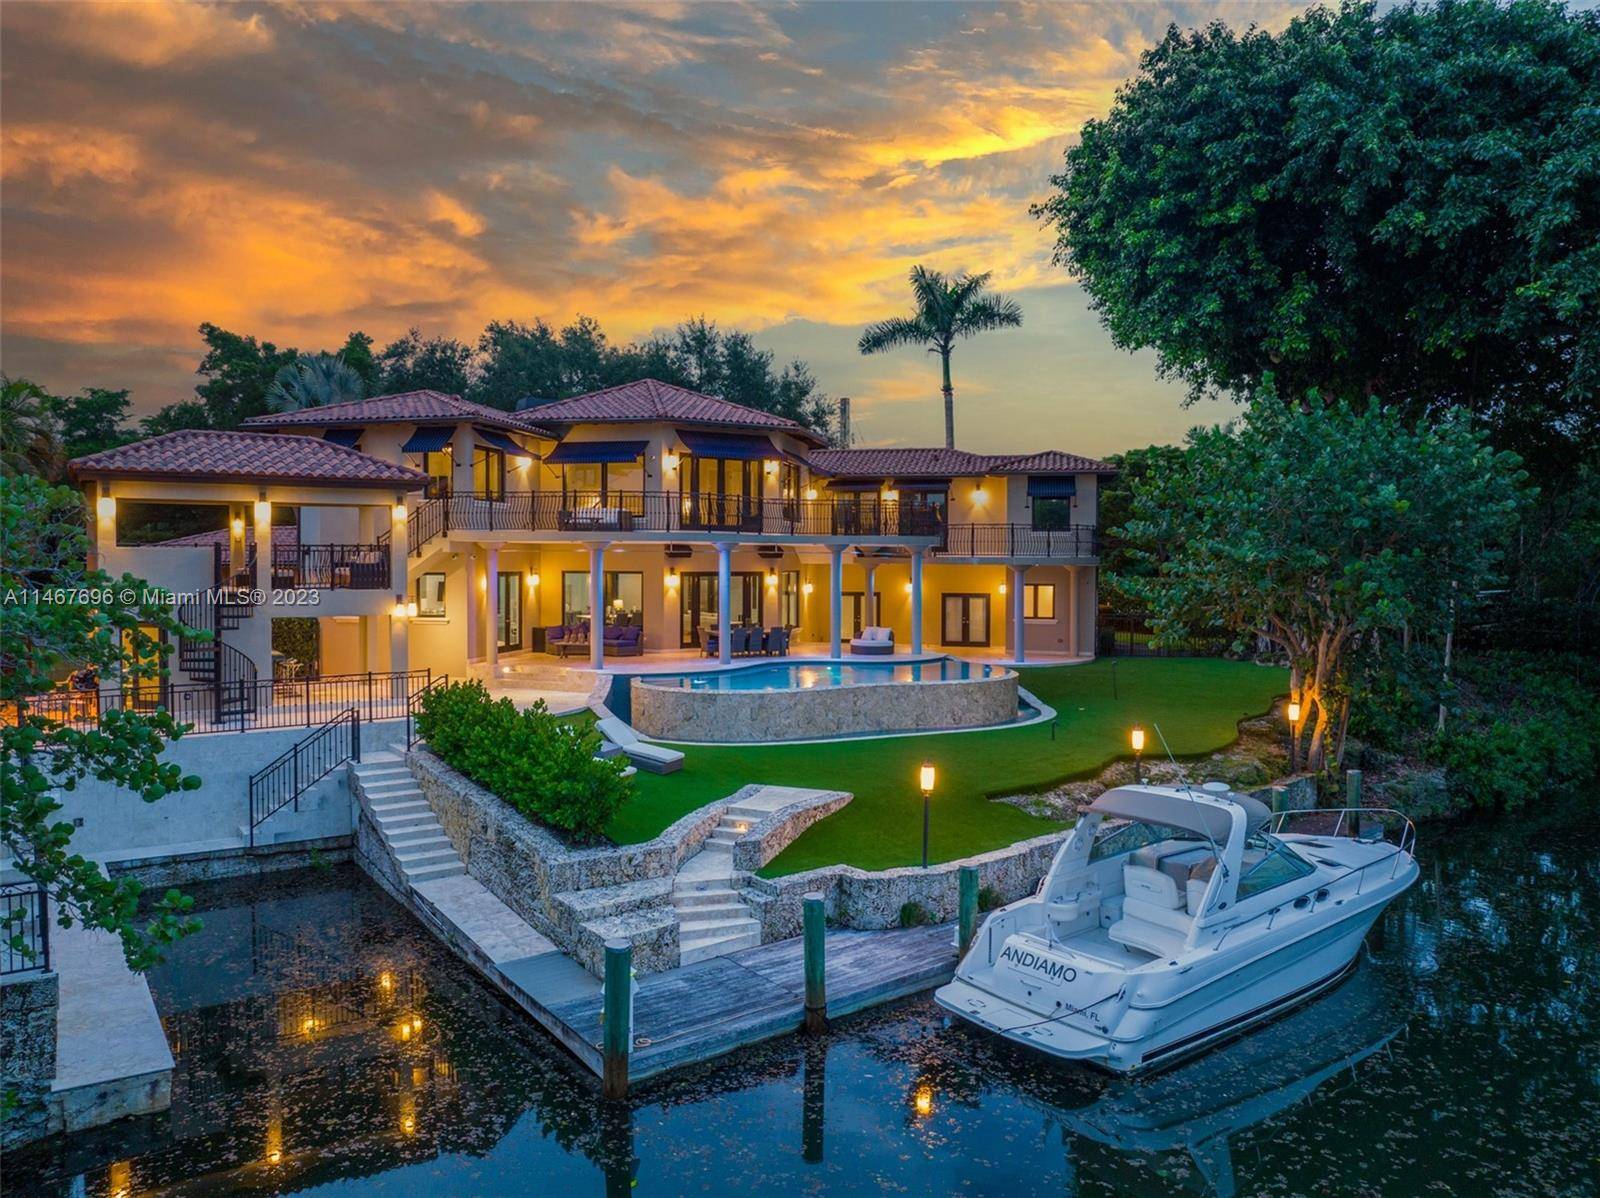 An idyllic waterfront estate, situated on a peaceful double corner lot in the heart of South Coral Gables, set against a picturesque bridge vista, stunning Banyan and mature Oak trees.